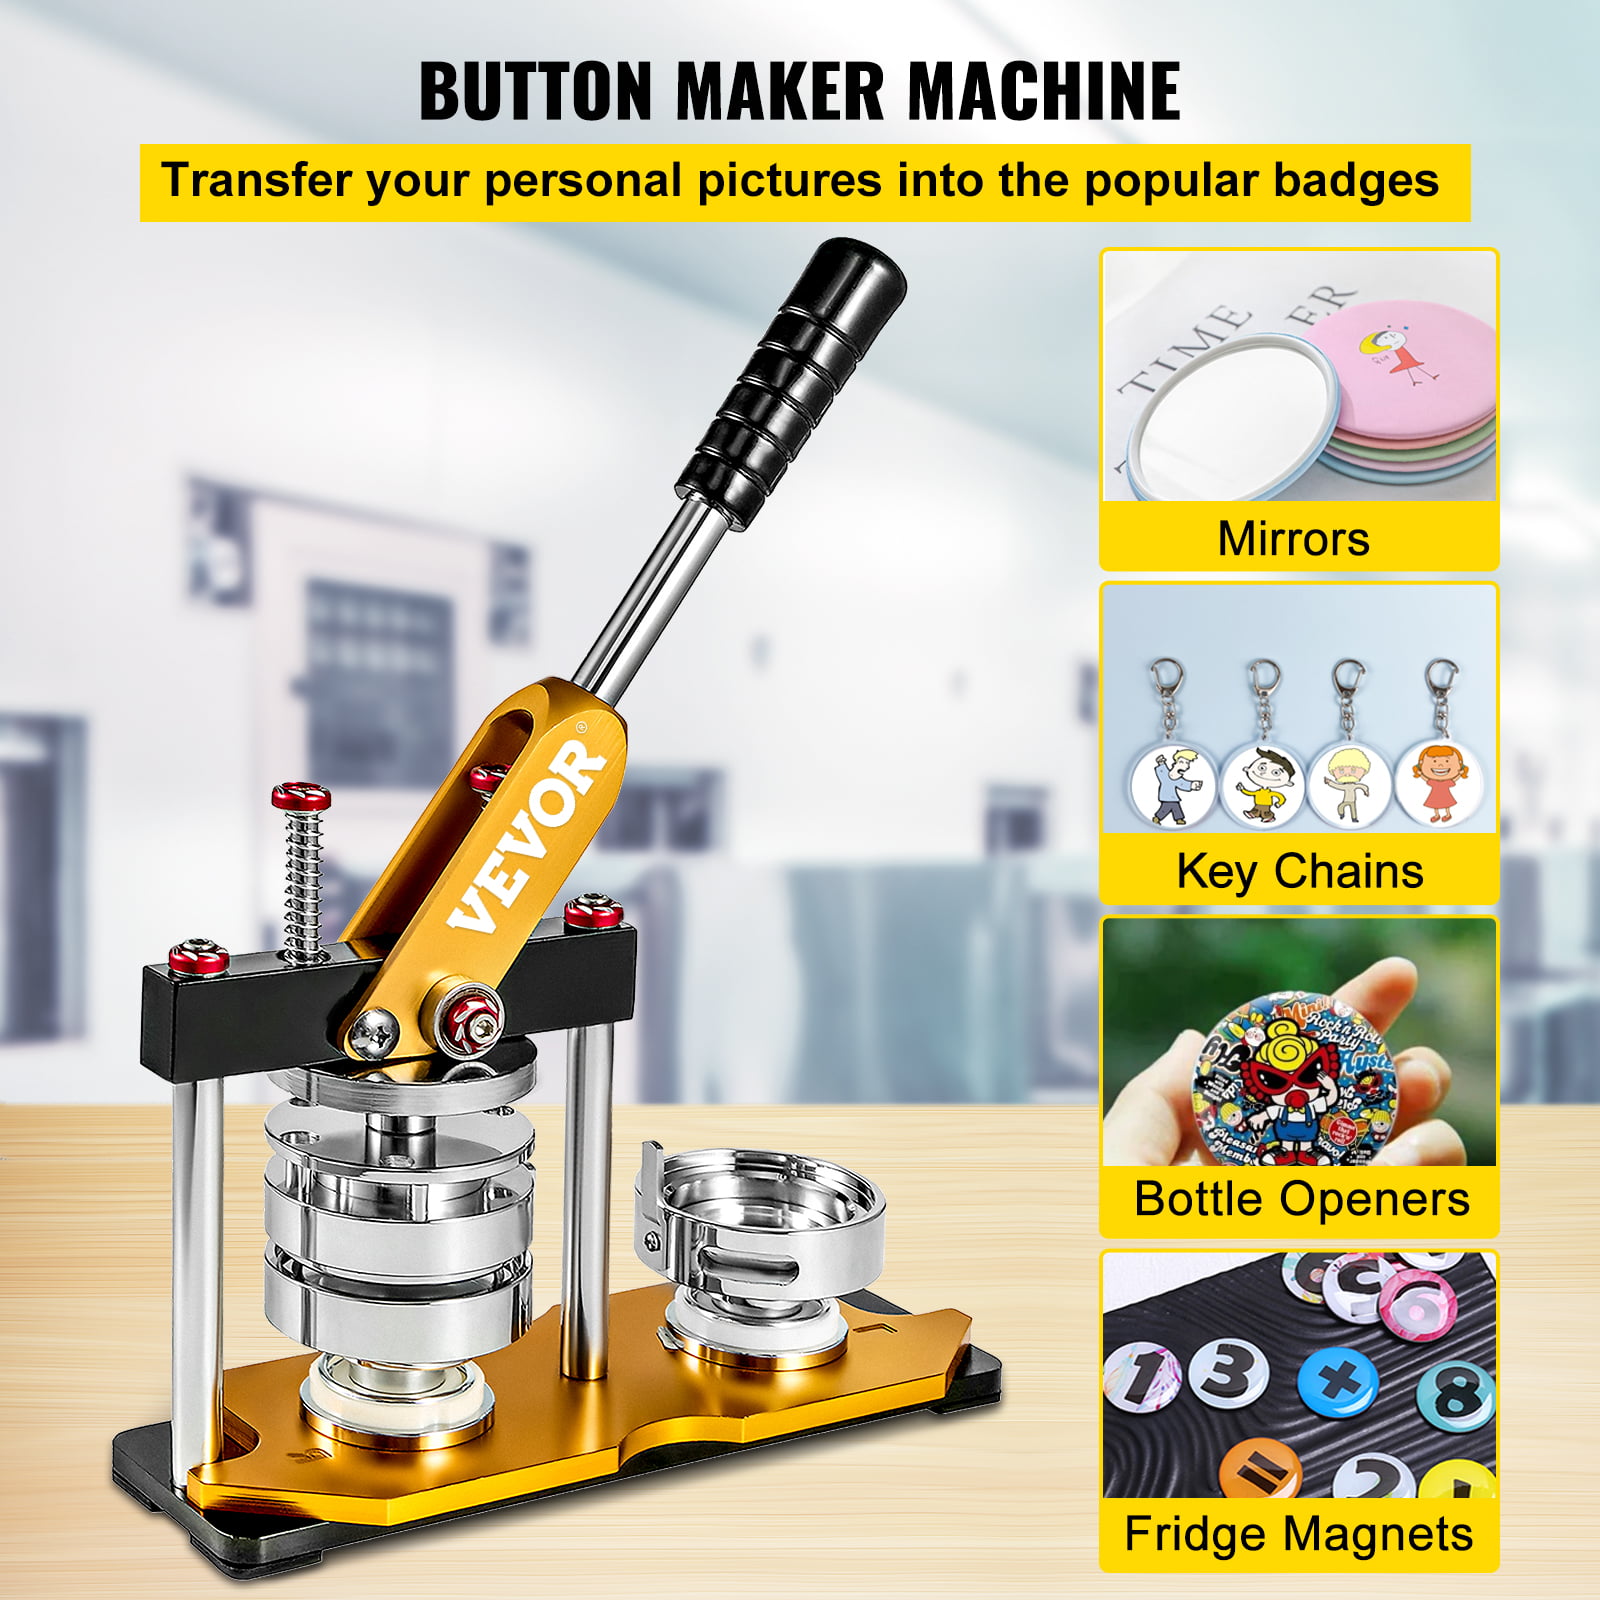 VEVOR Button Maker Machine 1 in. Button Badge Maker 25 mm with 500 Free  Button Parts and 1 Circle Cutter XZJ00000000000001V0 - The Home Depot